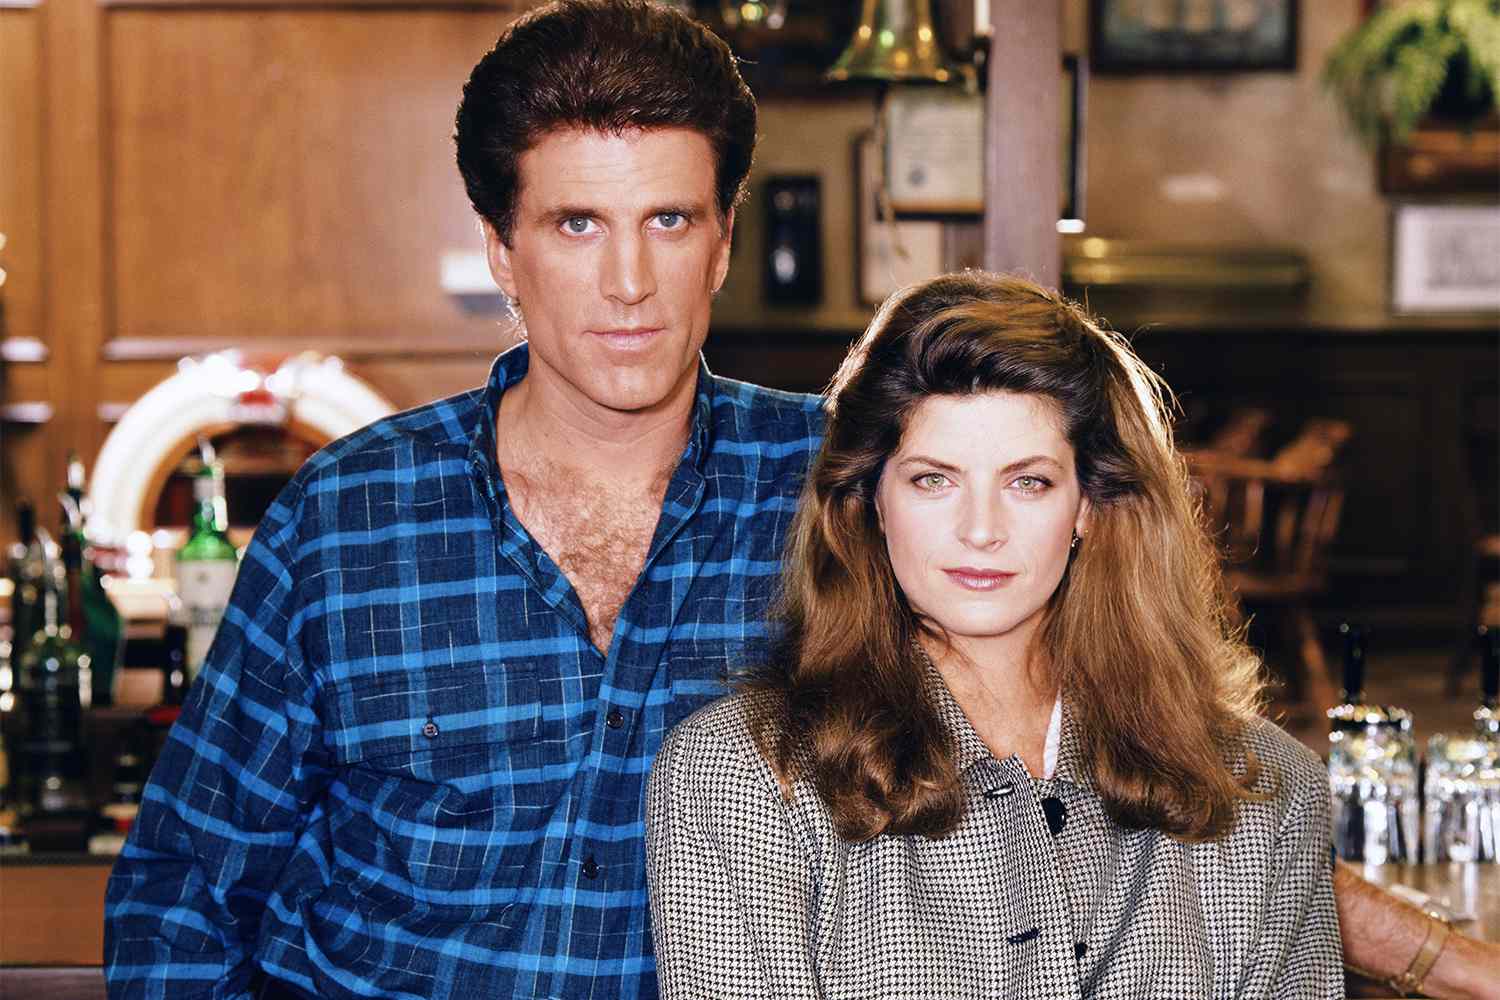 CHEERS -- Pictured: (l-r) Ted Danson as Sam Malone, Kirstie Alley as Rebecca Howe (Photo by NBCU Photo Bank/NBCUniversal via Getty Images via Getty Images)